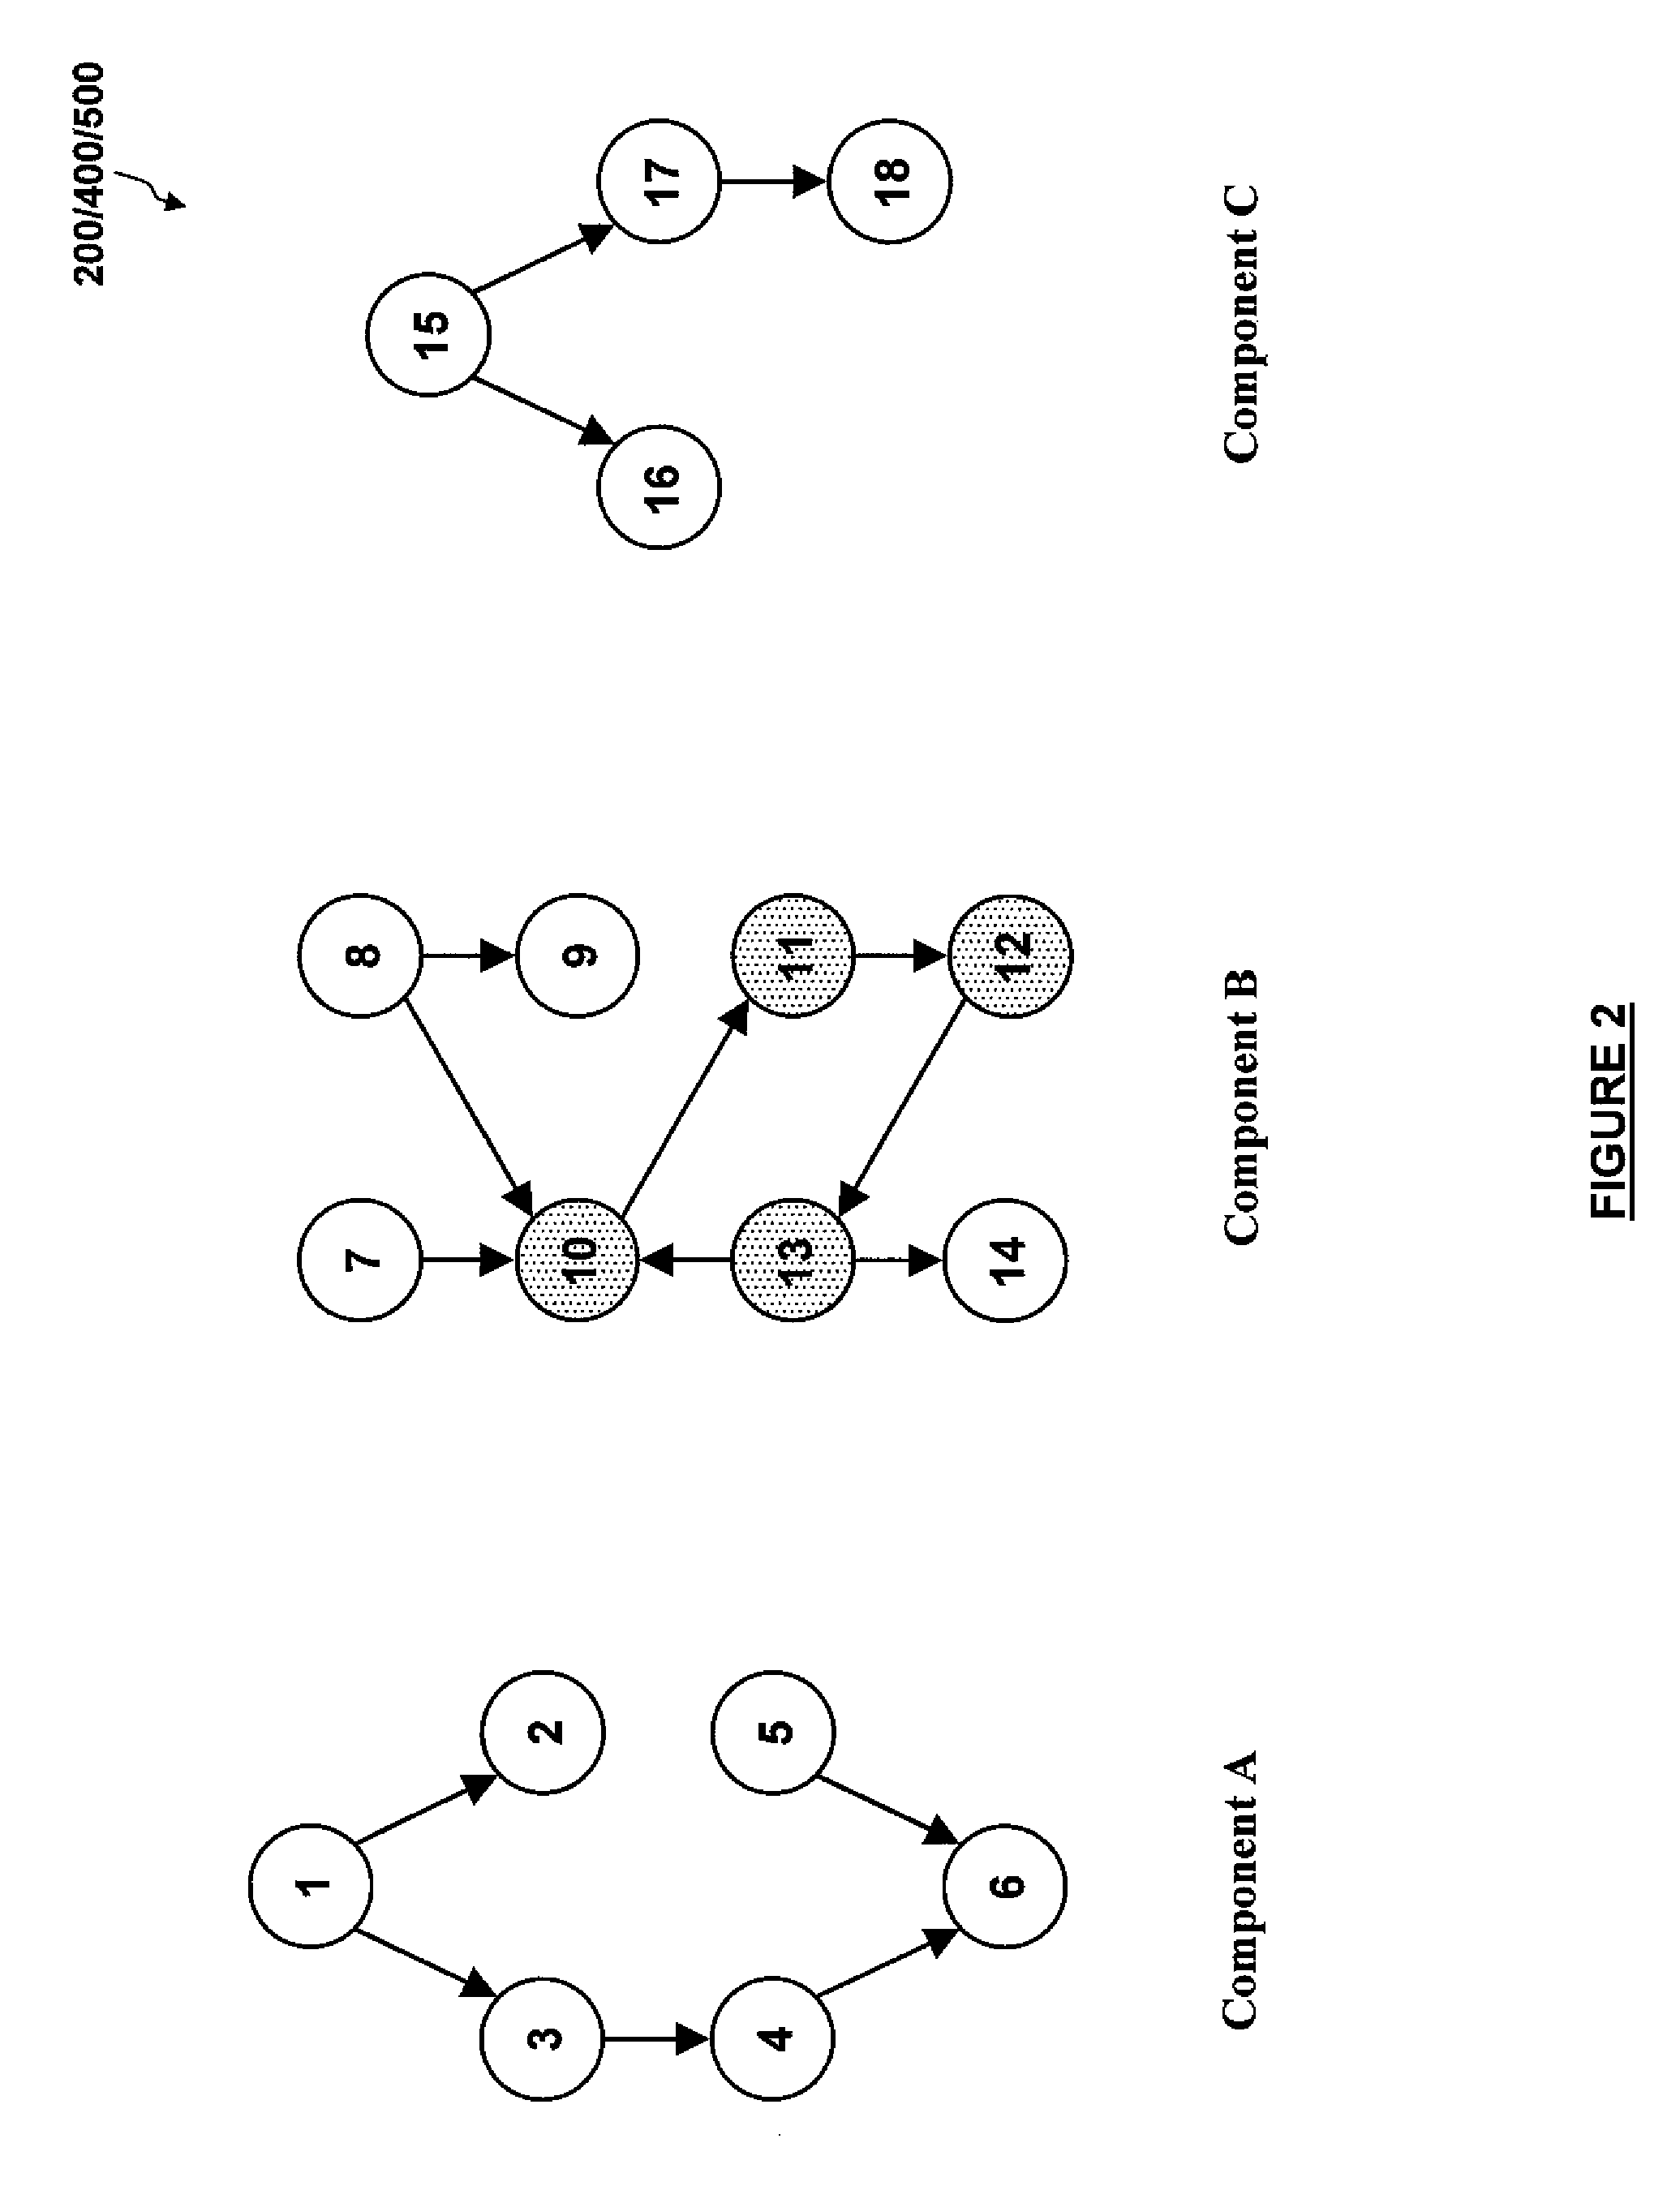 Topological sorting of cyclic directed graphs